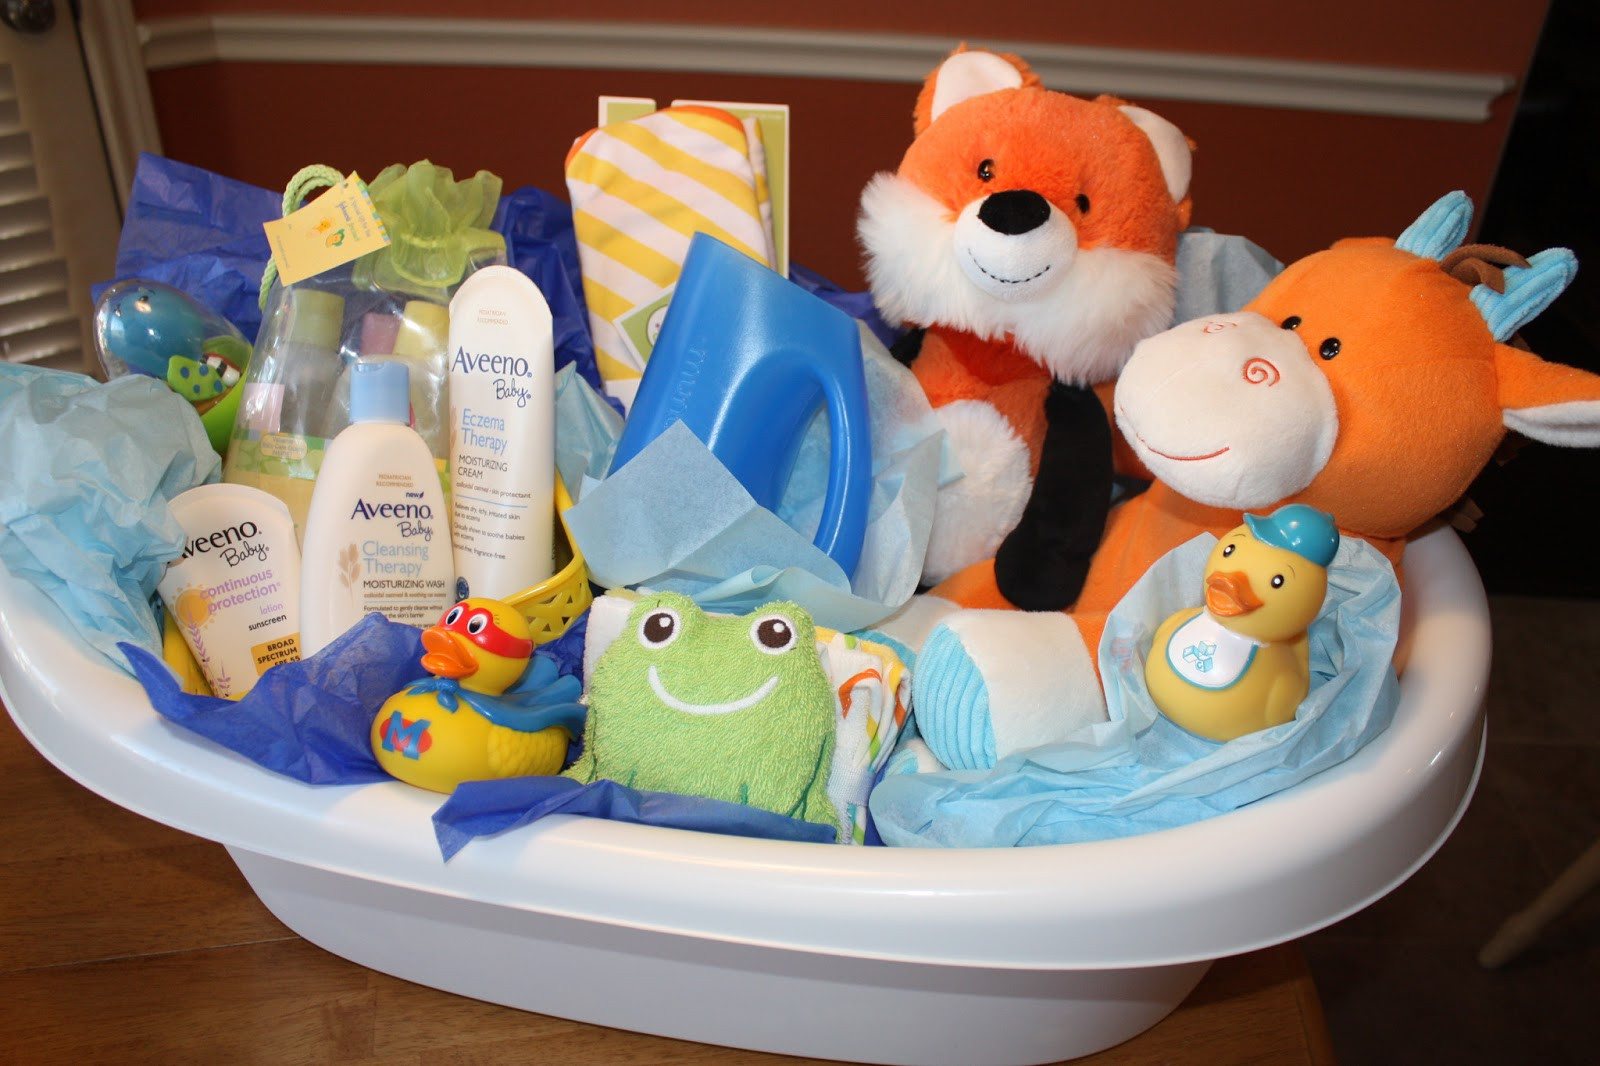 Baby Bath Tub Gift Ideas
 The Ultimate $5 99 Baby Shower Gift